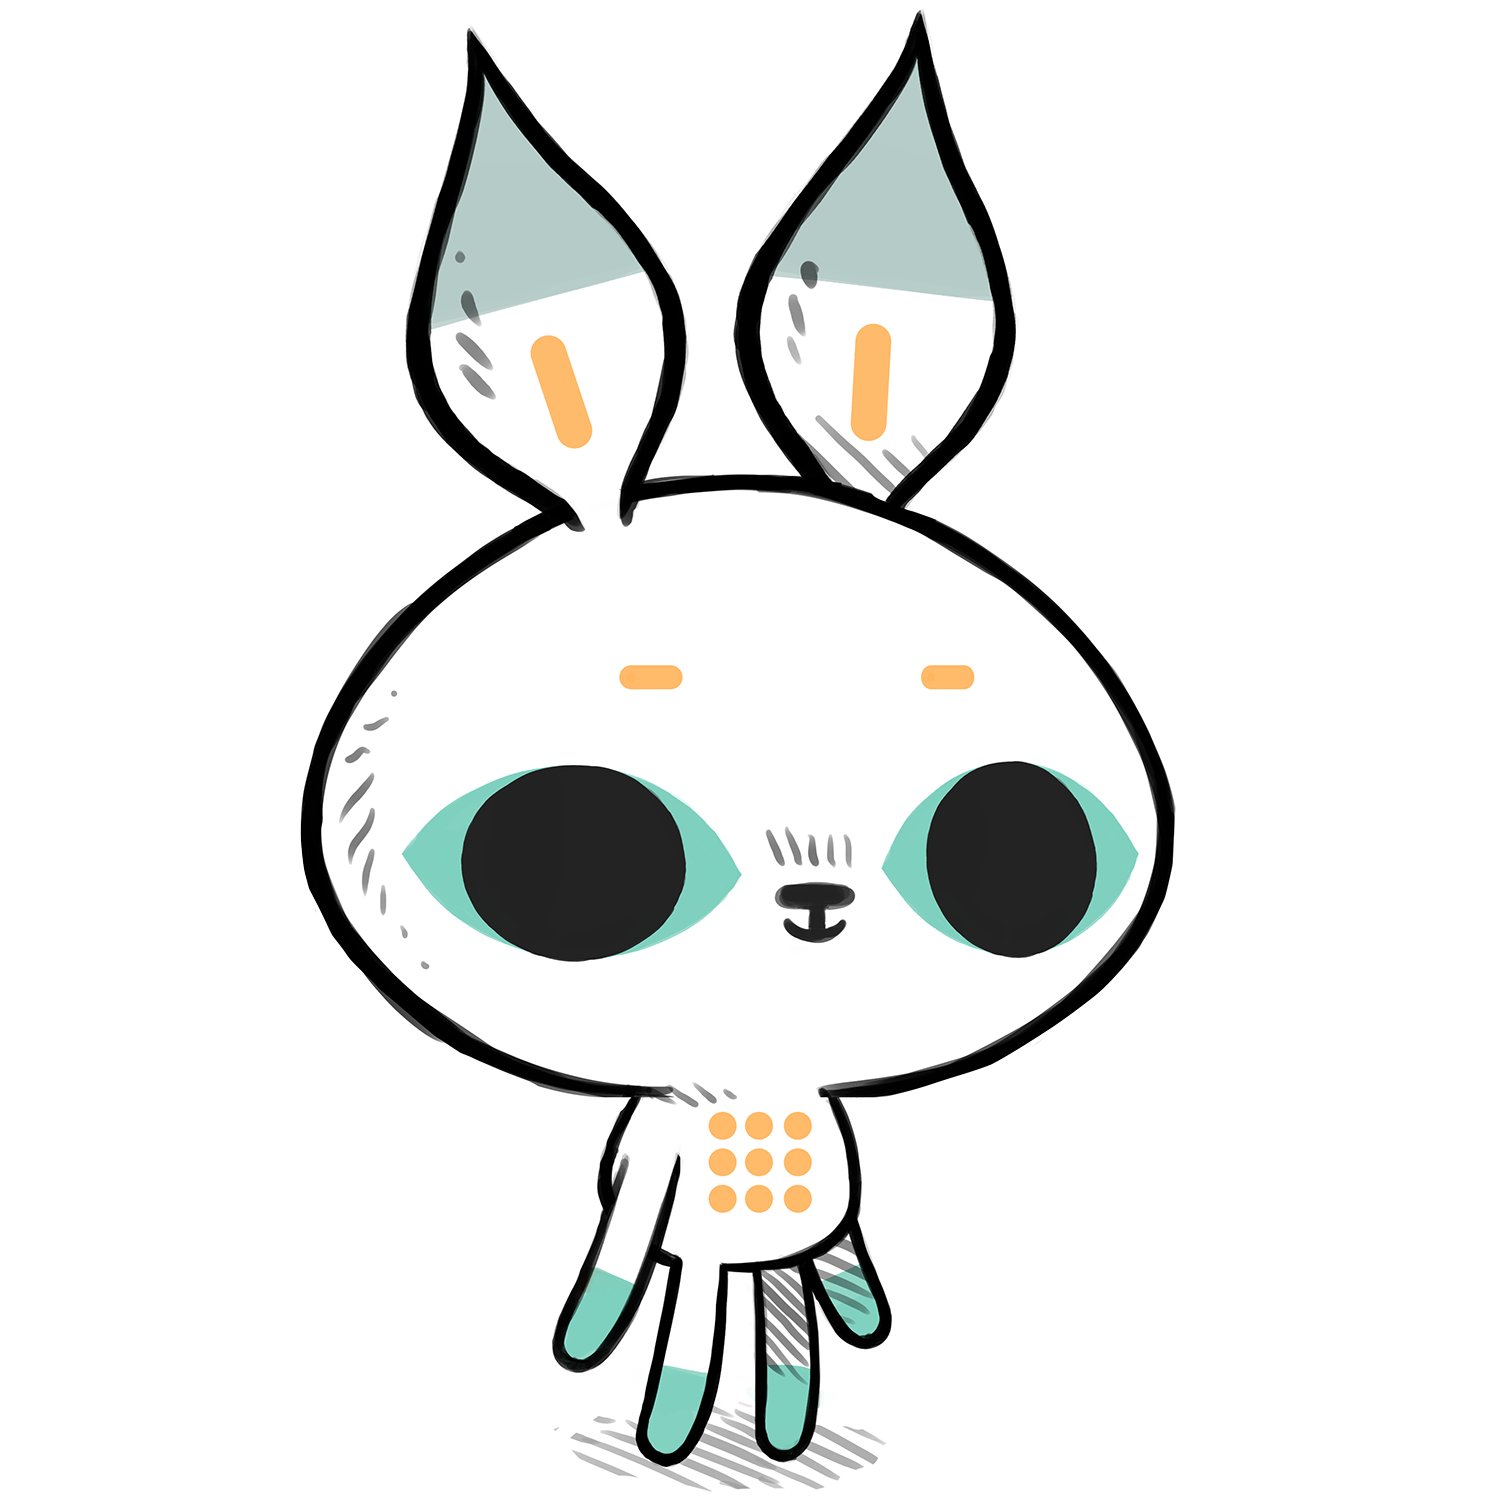 An illustration of Dotbit the mascot of Dotgrid which looks like a white rabbit with big eyes and stumps for arms and legs